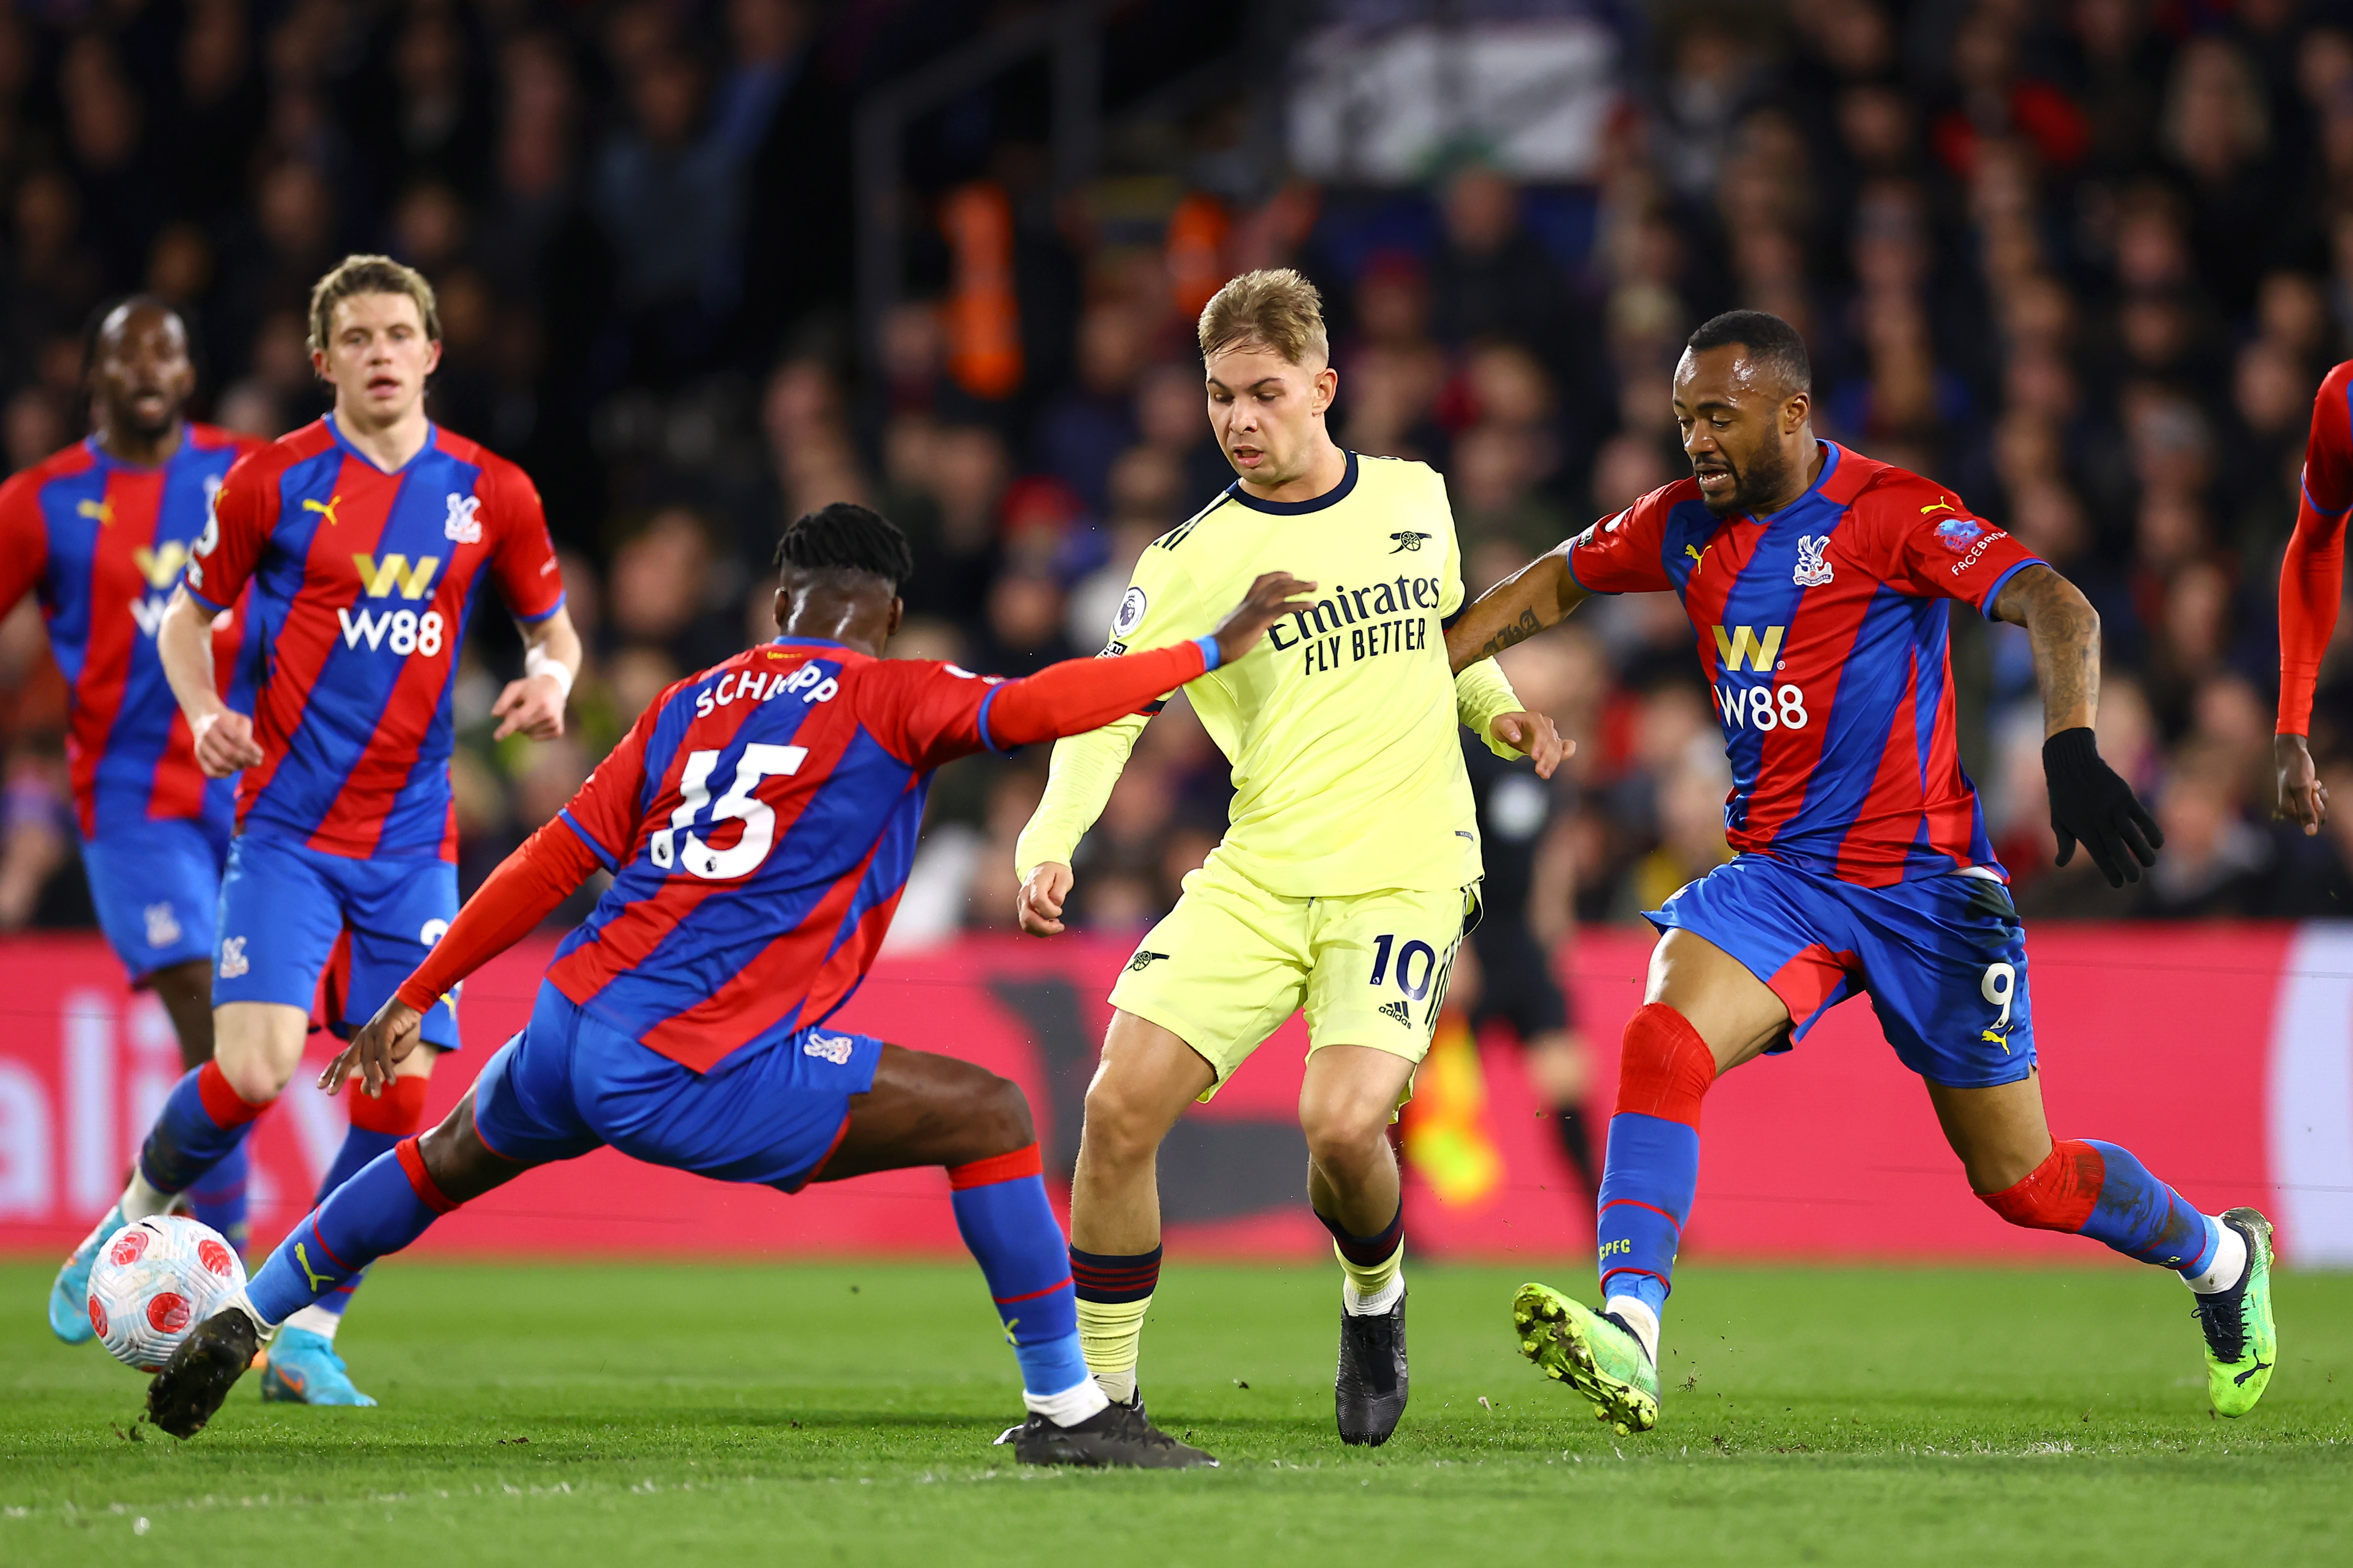 Player ratings: Crystal Palace 3-0 Arsenal - Top four hopes dealt blow as Gunners thumped by London rivals